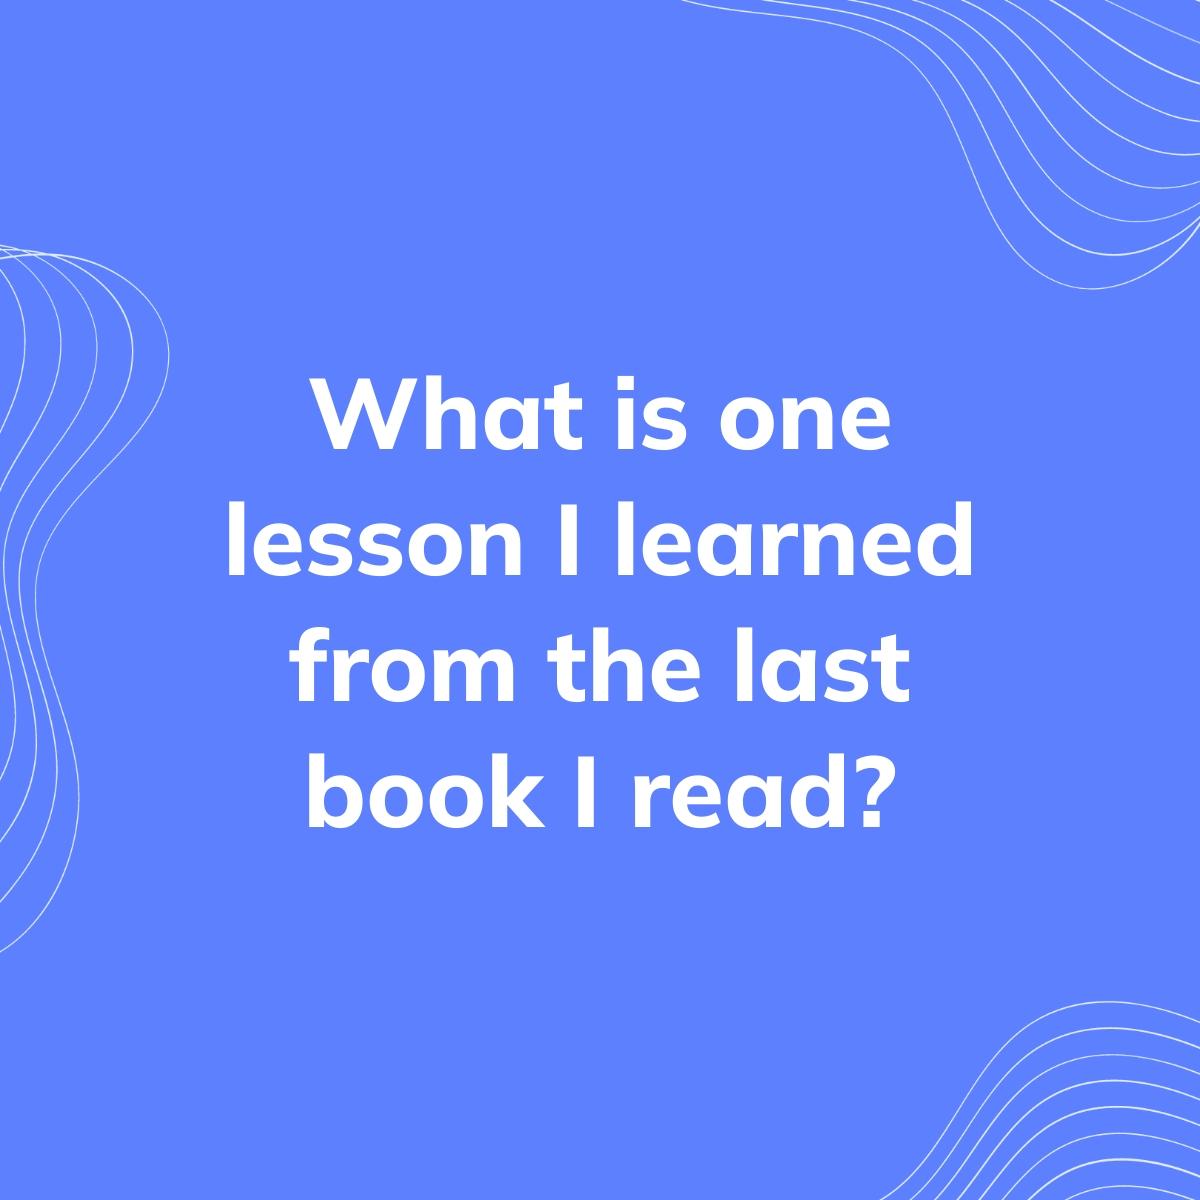 Journal Prompt: What is one lesson I learned from the last book I read?